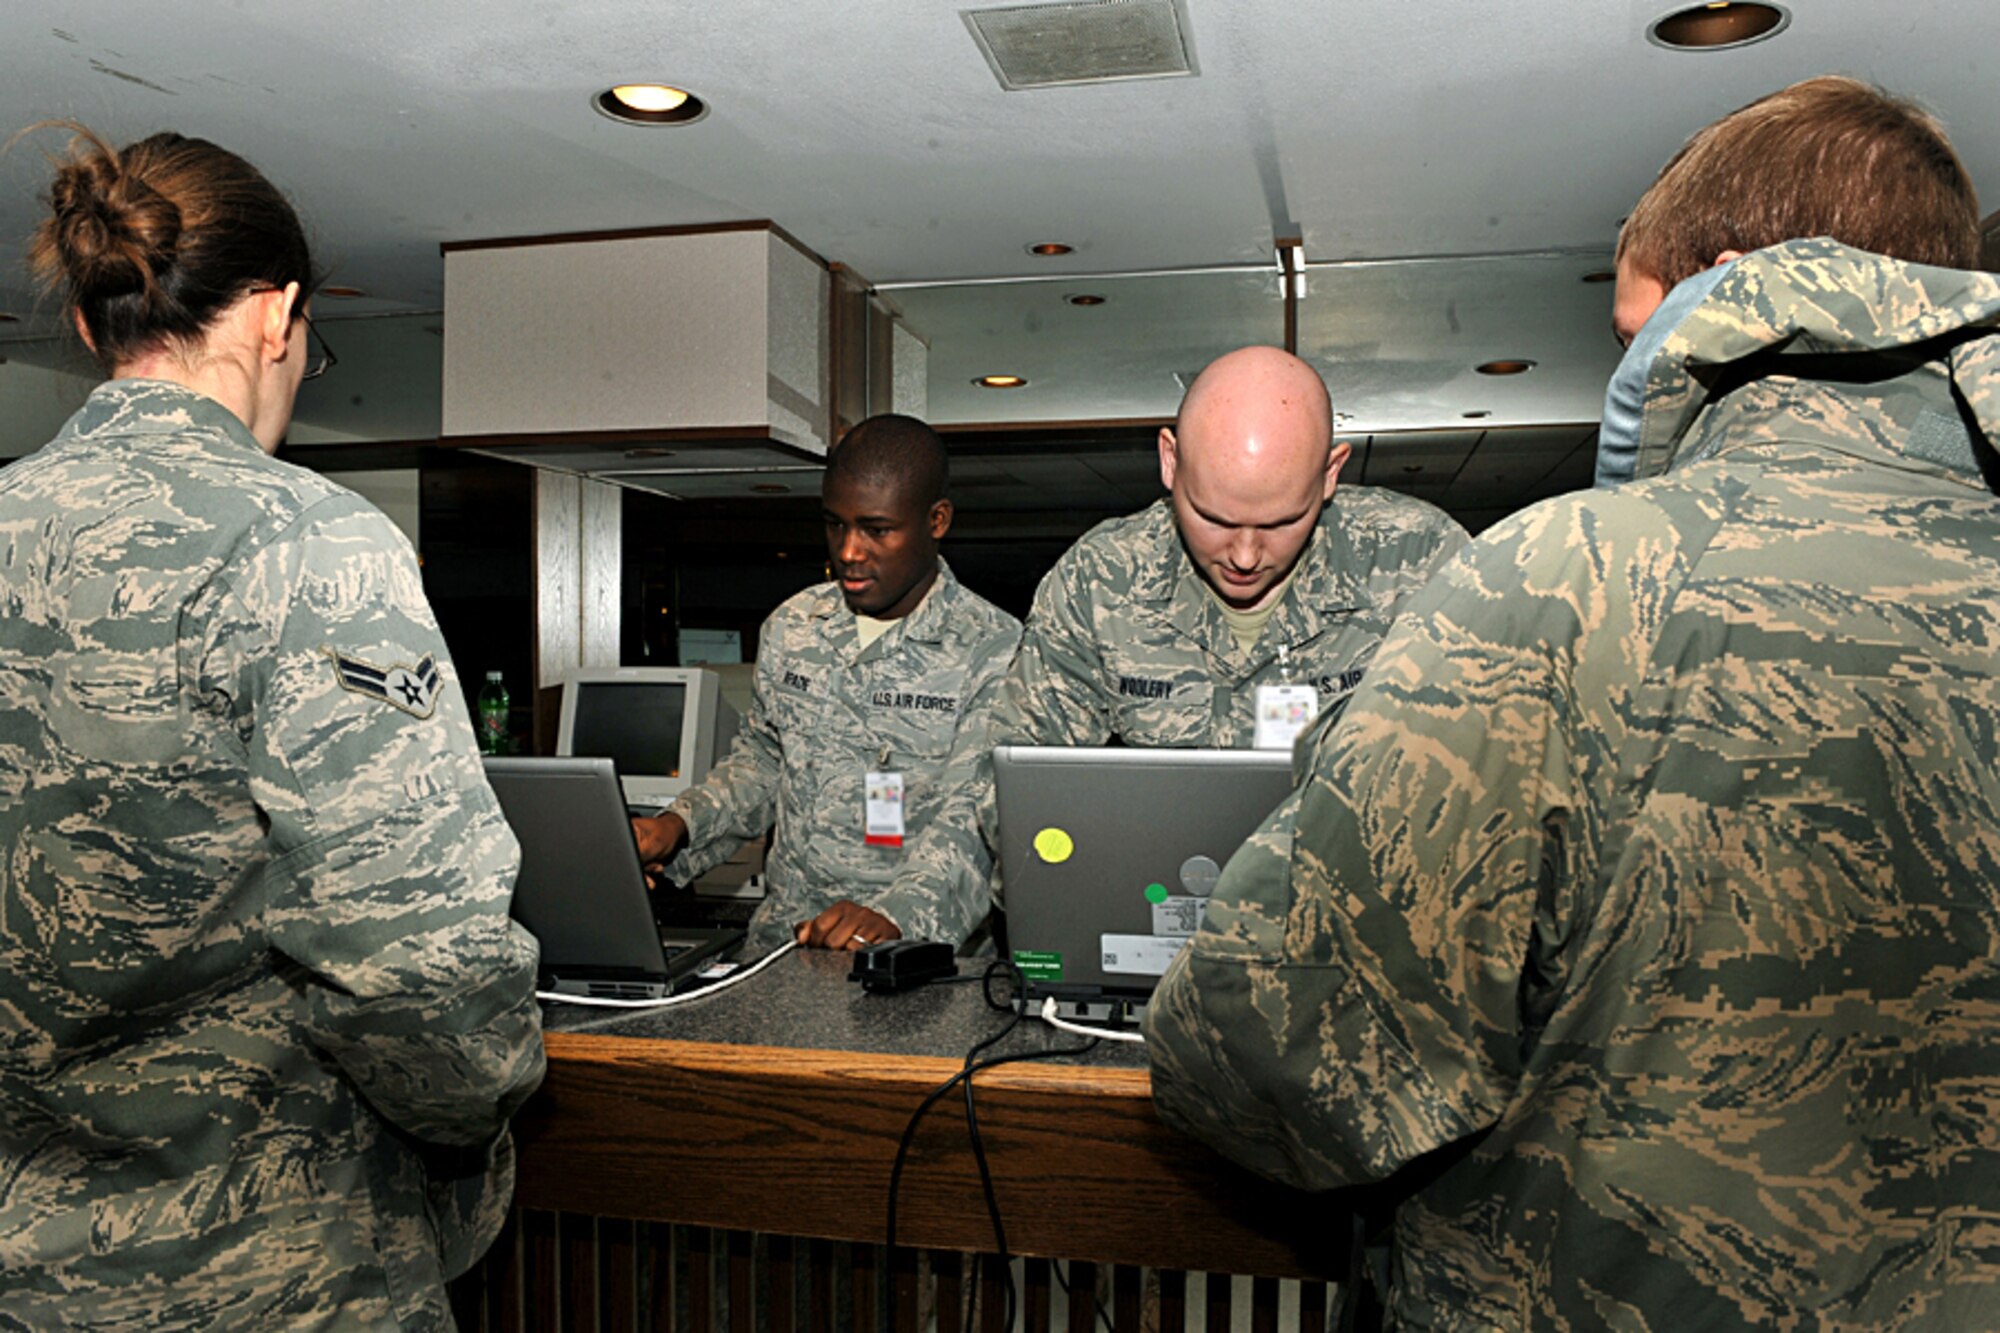 OFFUTT AIR FORCE BASE, Neb. - Senior Airman Krist Kpade and Staff Sgt. David Woolery, both with the 55th Medical Support Squadron, check in members of Team Offutt during a Point of Distribution exercise Jan. 21 at the community center here. More than 1,000 active-duty personnel processed through the center to test the 55th Wing's ability to respond to a public health emergency.  Many received their H1N1 inoculation during the event. U.S. Air Force photo by Charles Haymond
 
